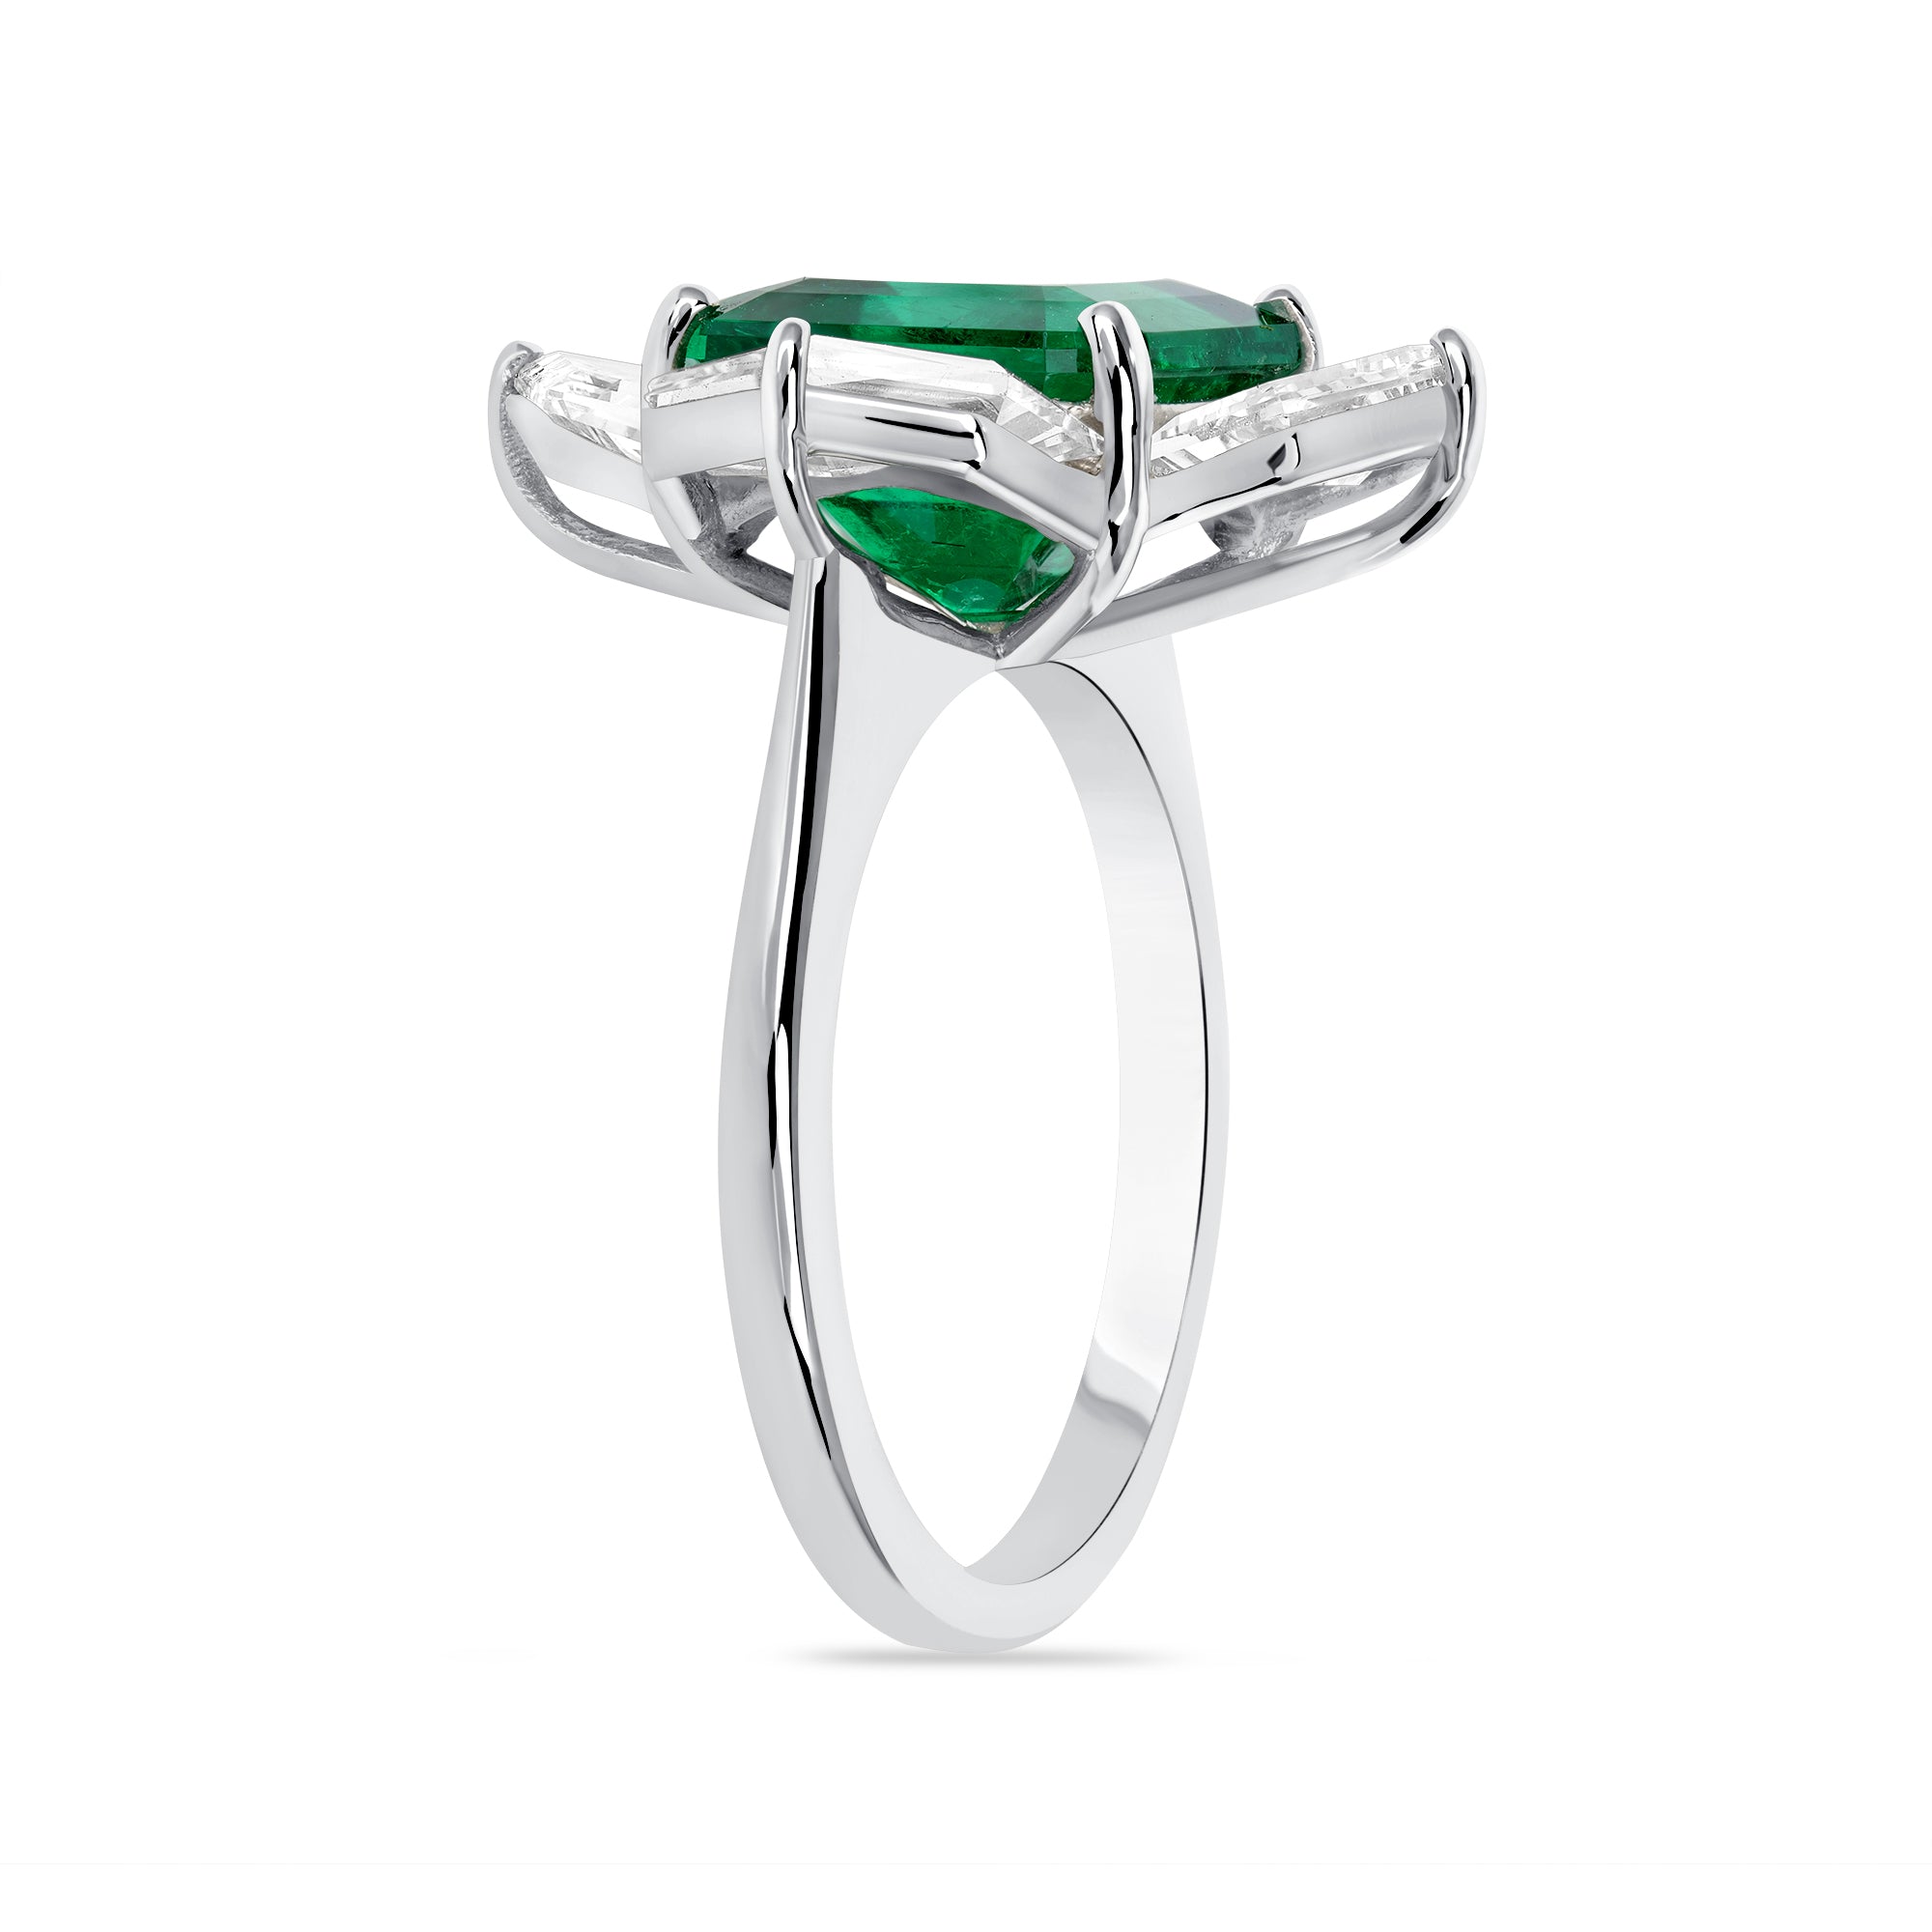 Square Emerald Cut Colombian Emerald and Four Cadillac Diamonds Ring